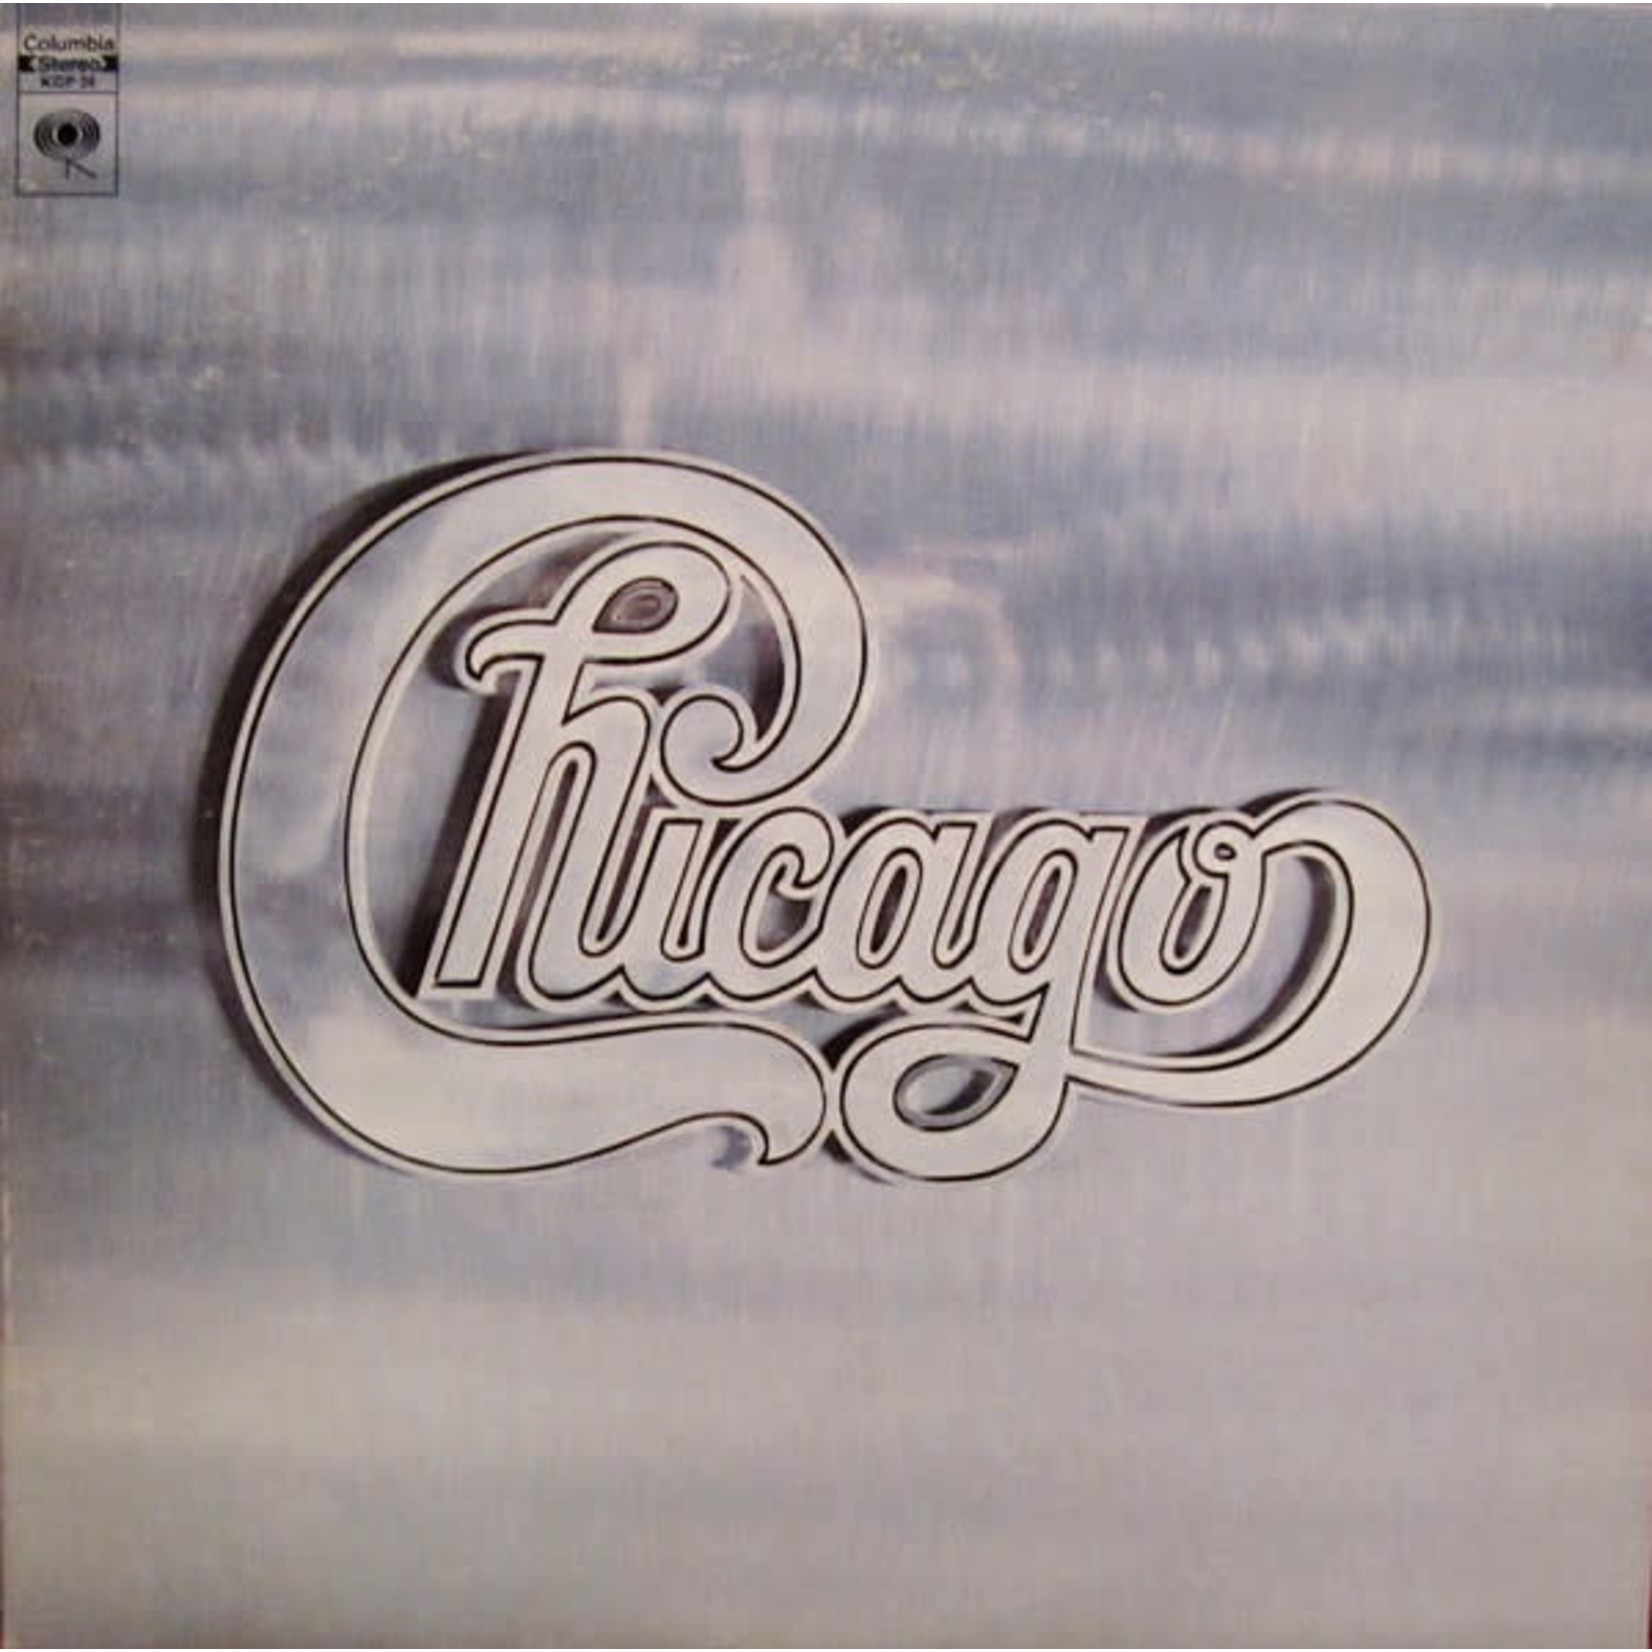 [Vintage] Chicago - self-titled (2LP, 1970 Columbia material, compilation, with poster)